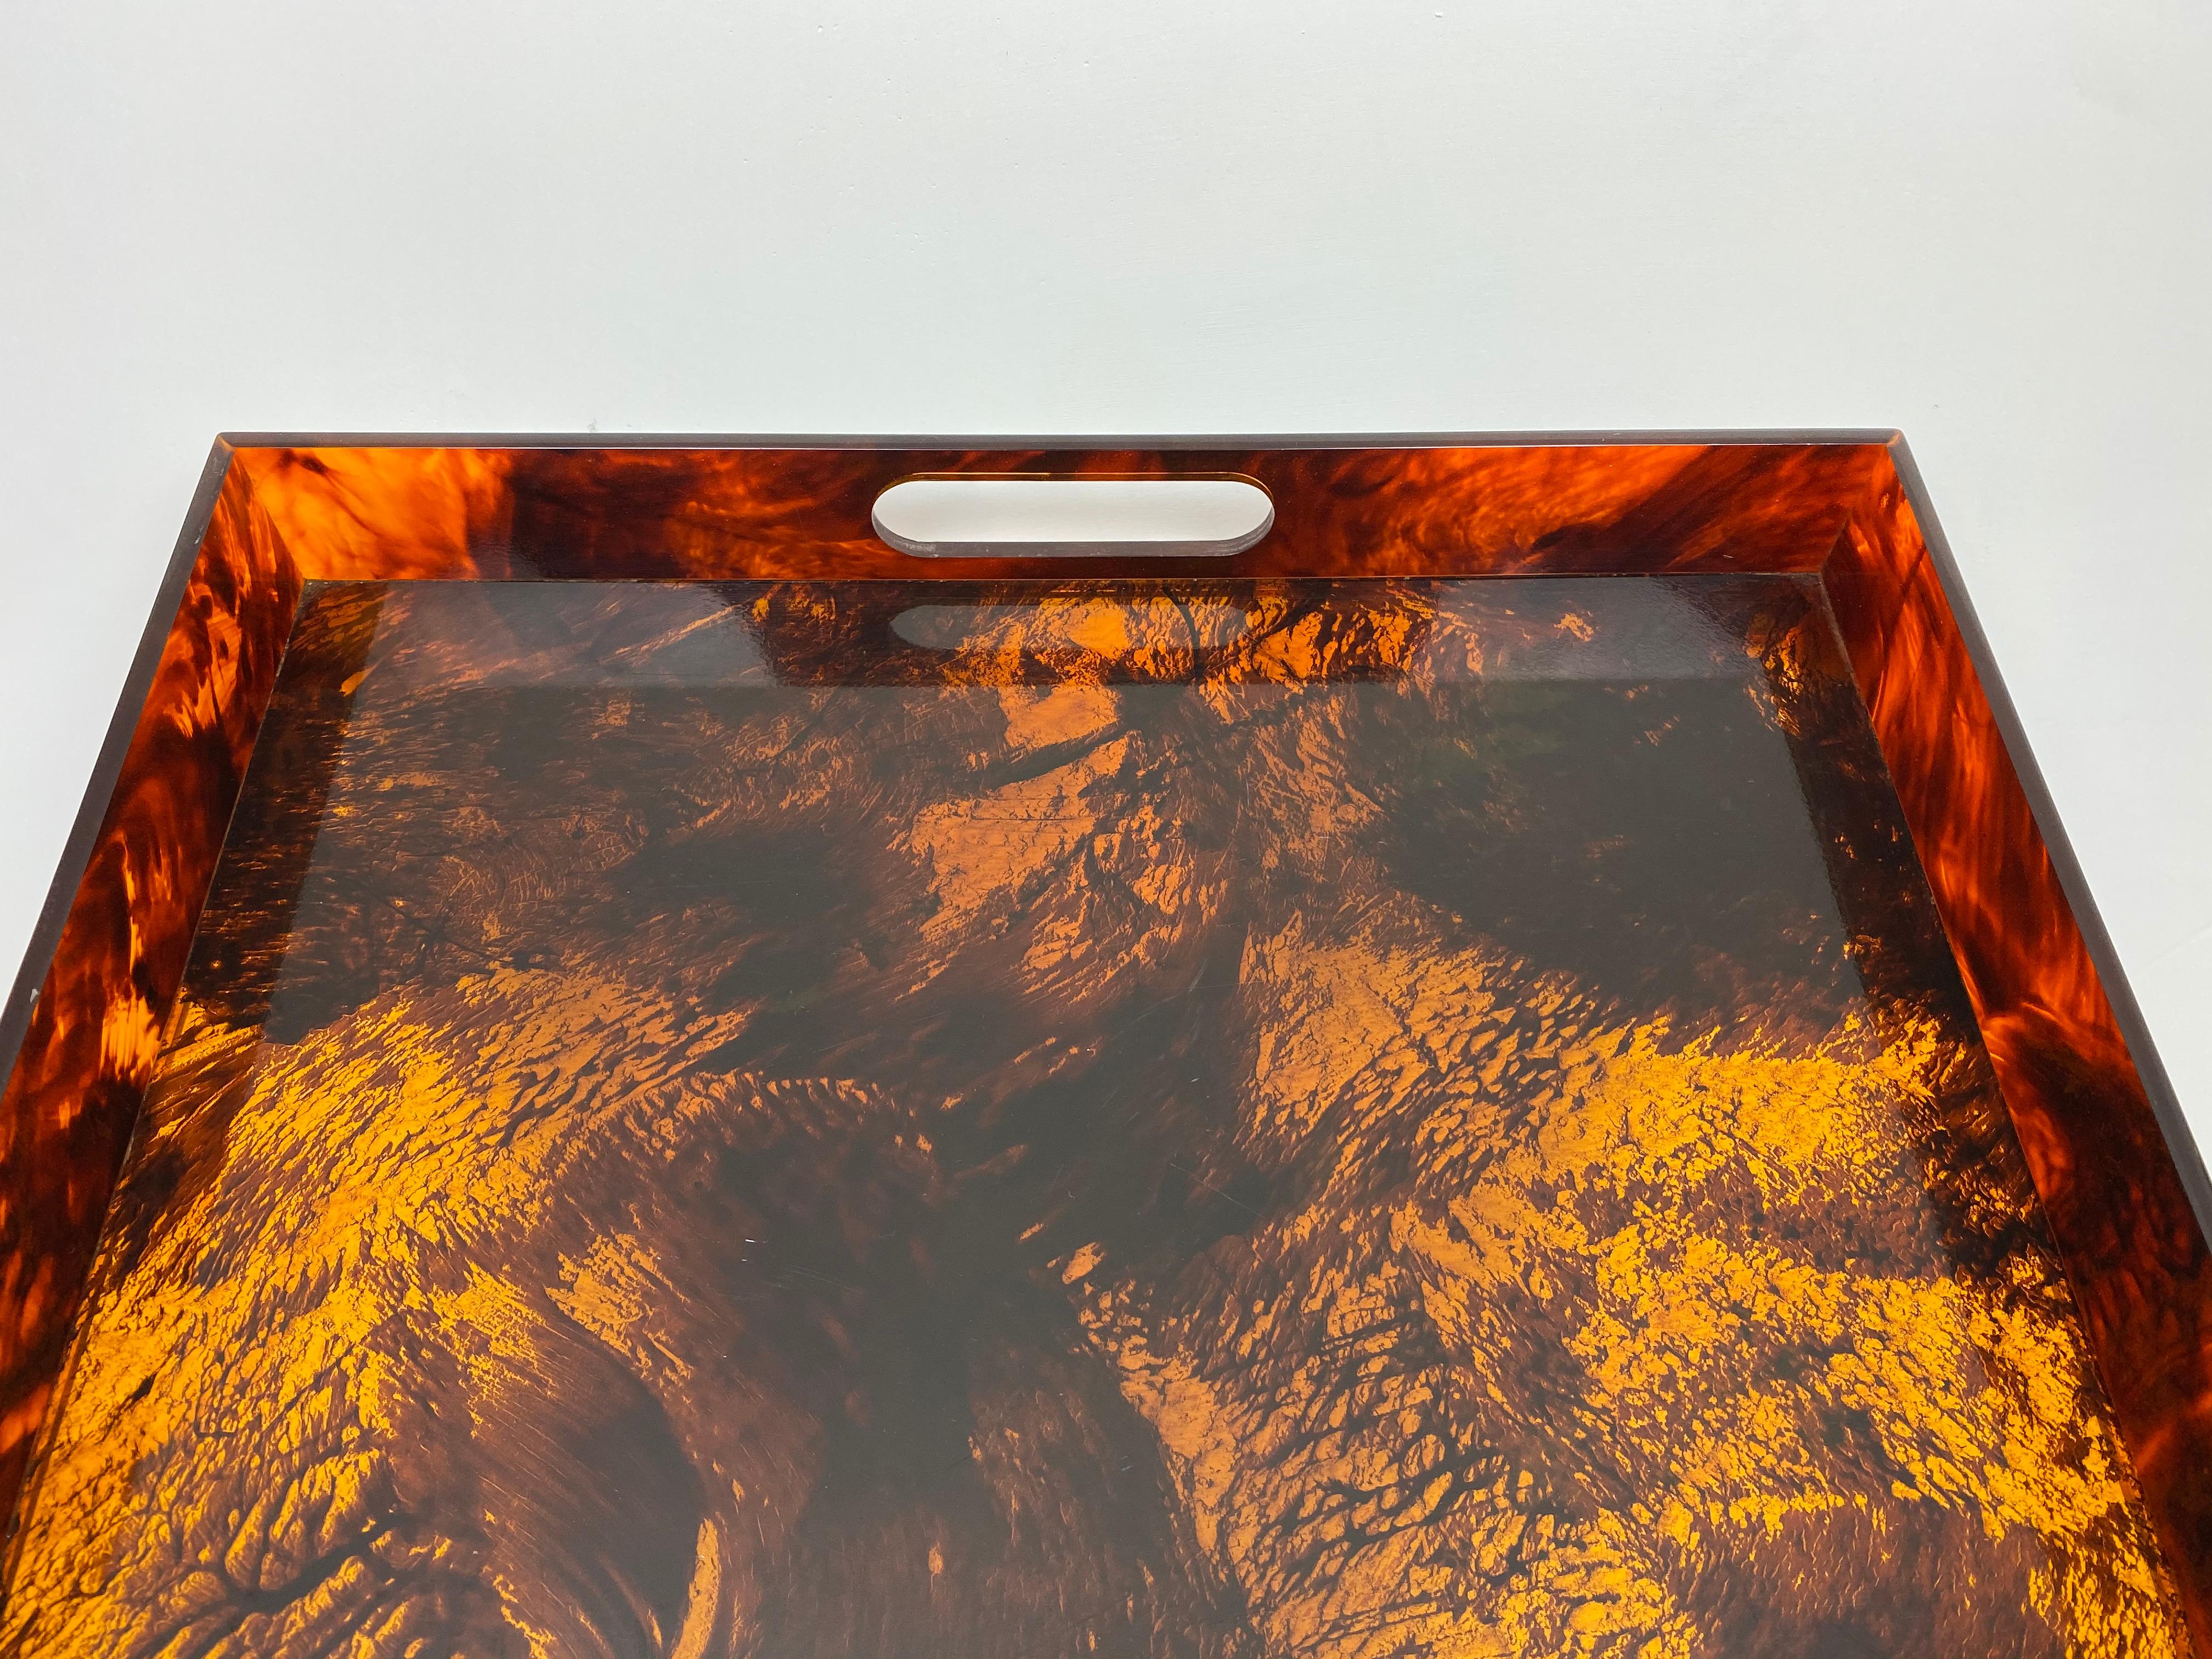 Late 20th Century Tortoiseshell Lucite Serving Tray Centerpiece, Willy Rizzo Style, Italy, 1970s